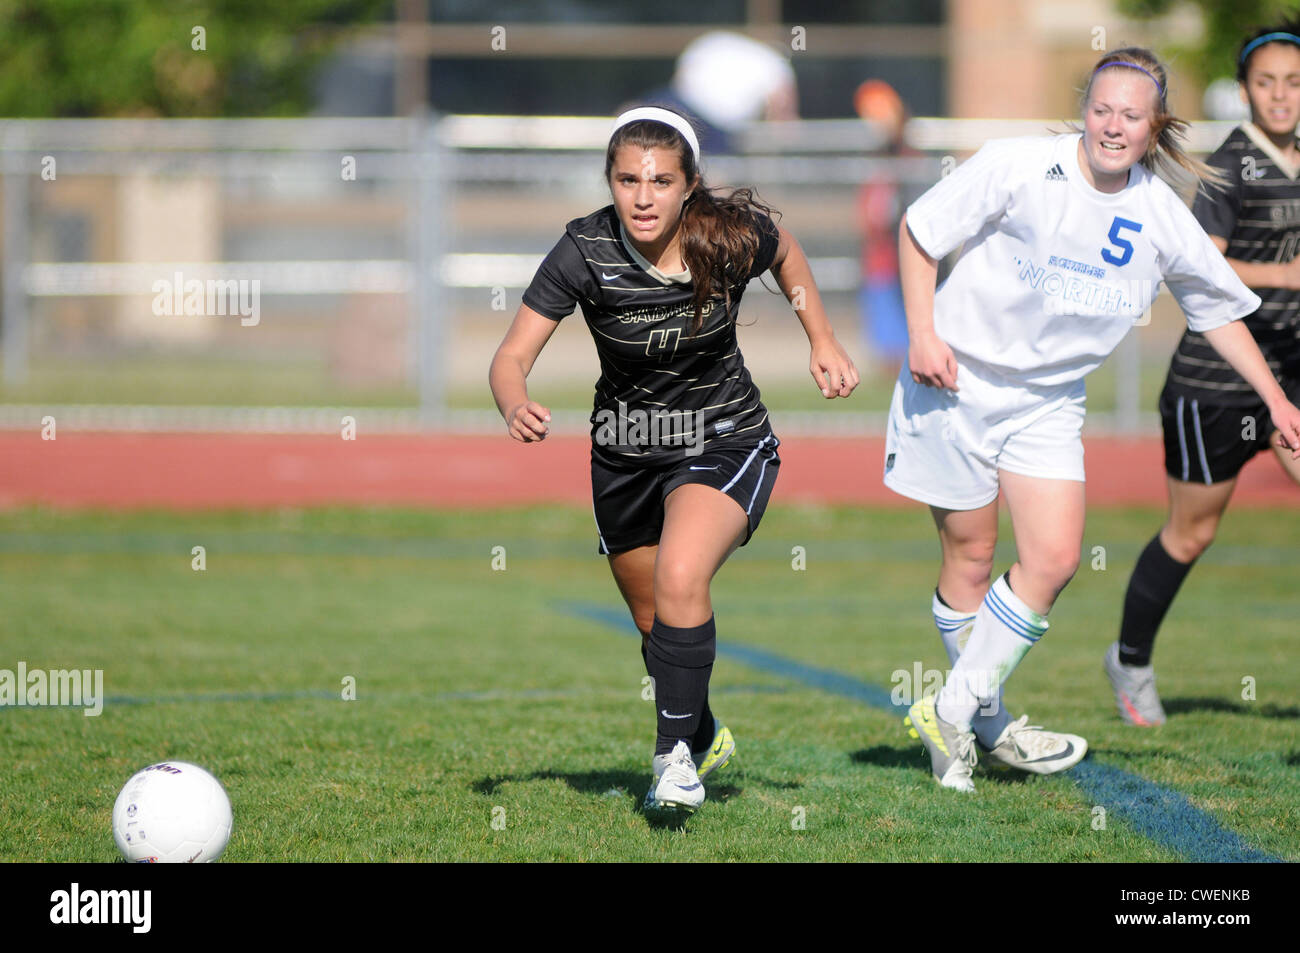 Soccer player rushes after a loose ball to secure the ball during a high  school match. USA Stock Photo - Alamy